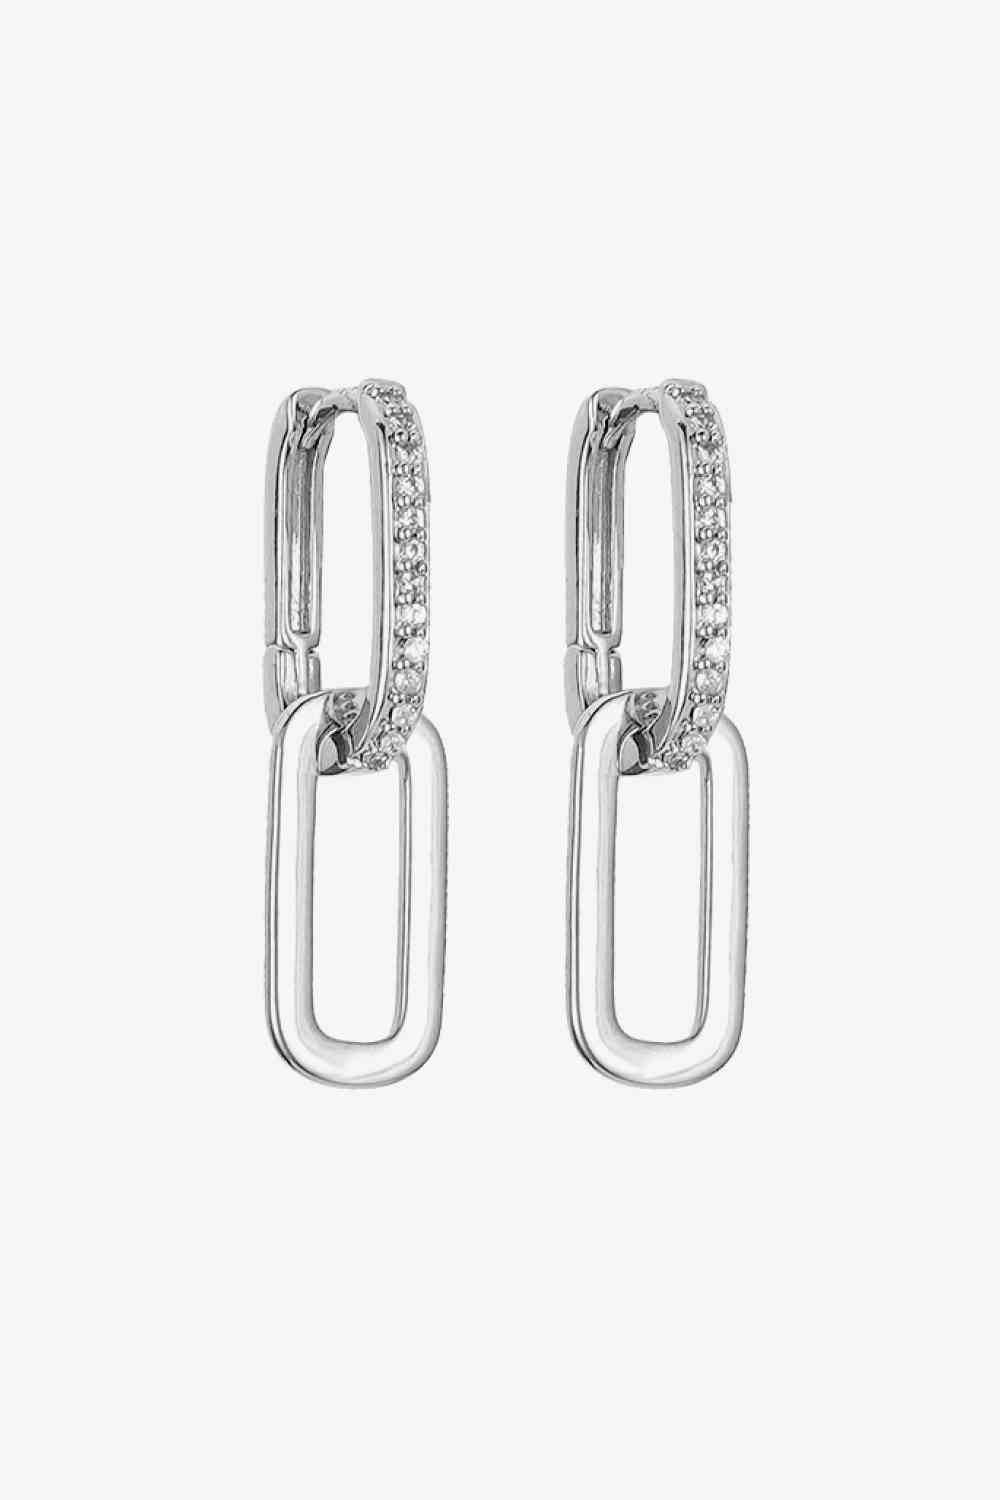 CUBIC ZIRCONIA LINK EARRINGS in Silver or Gold Plated Finish